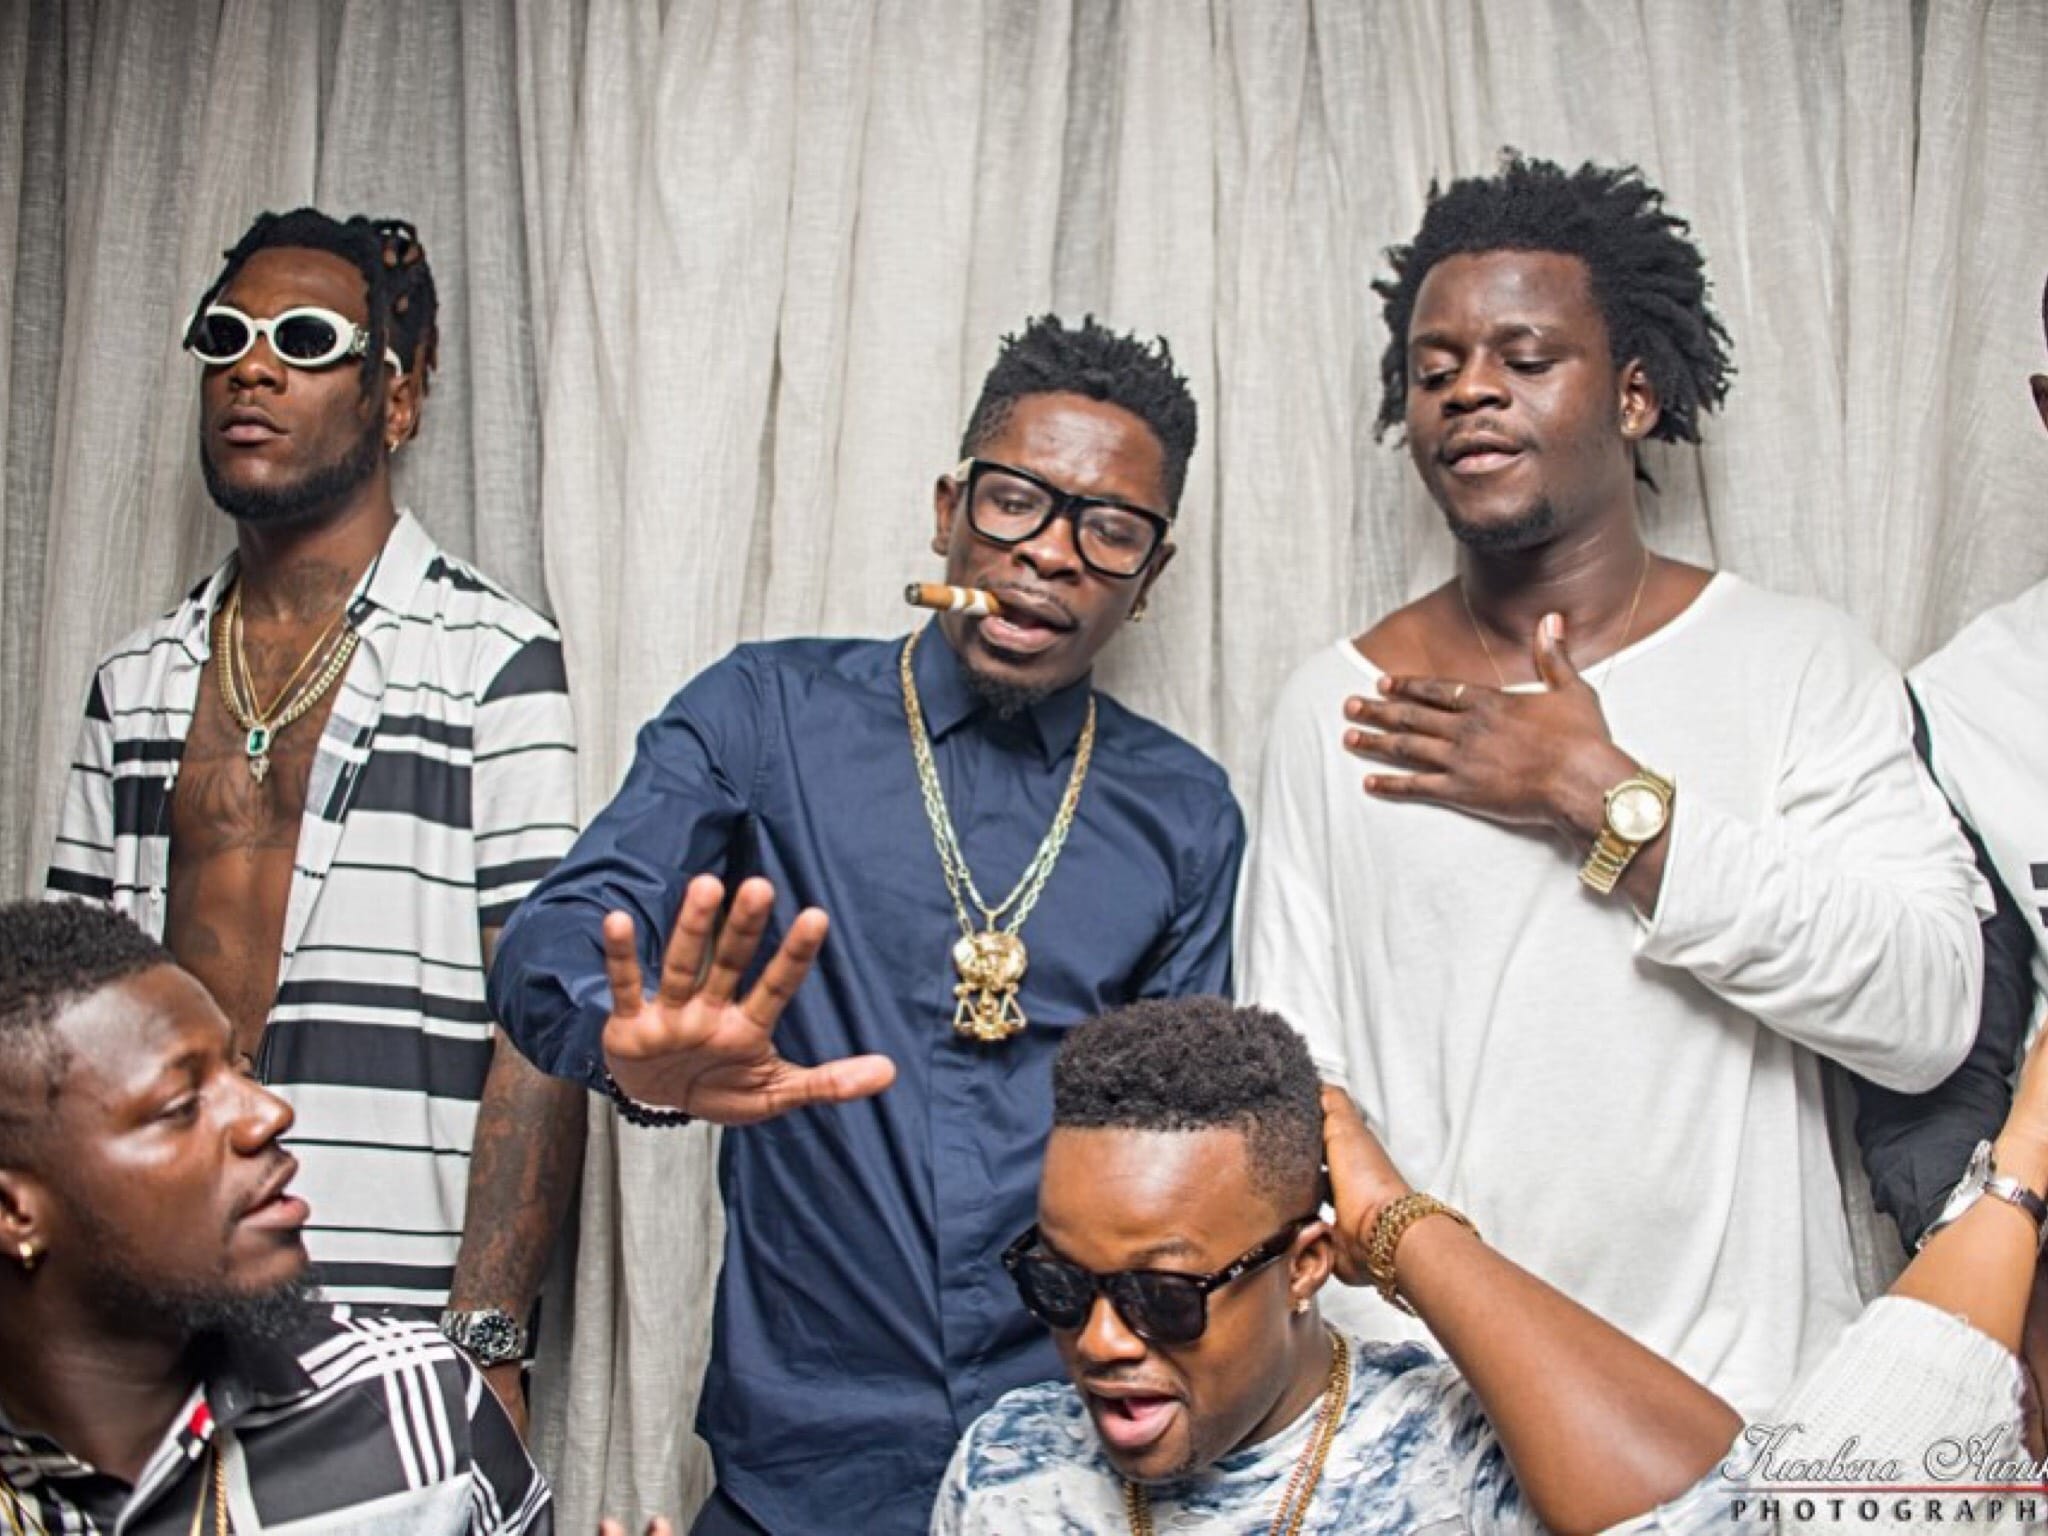 Fans of Shatta Wale stoke Shatta/Burna Boy rivalry ahead of their  performance at Afrochella tonight - Graphic Online